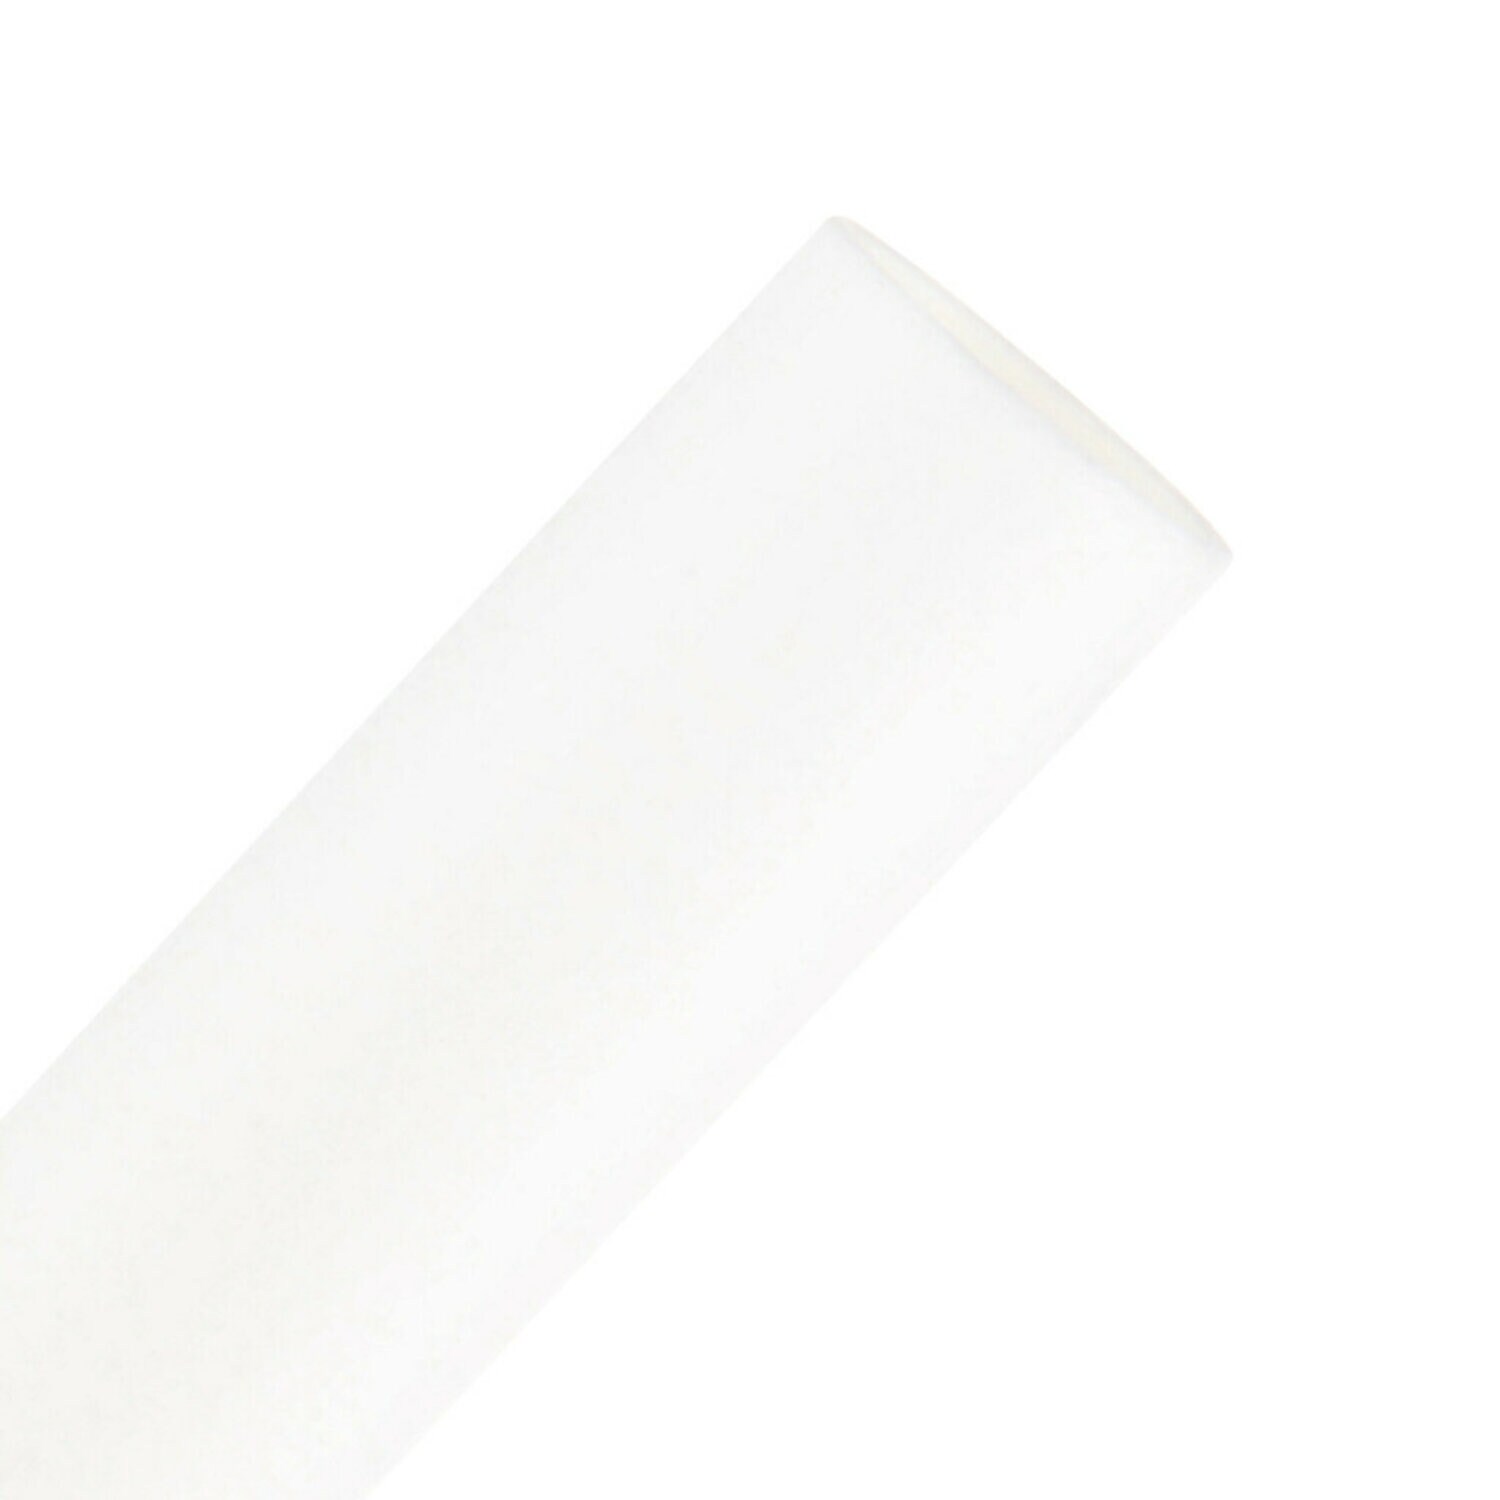 7010350191 - 3M Heat Shrink Thin-Wall Tubing FP-301-3/16-48"-White-250 Pcs, 48 in
Length sticks, 250 pieces/case